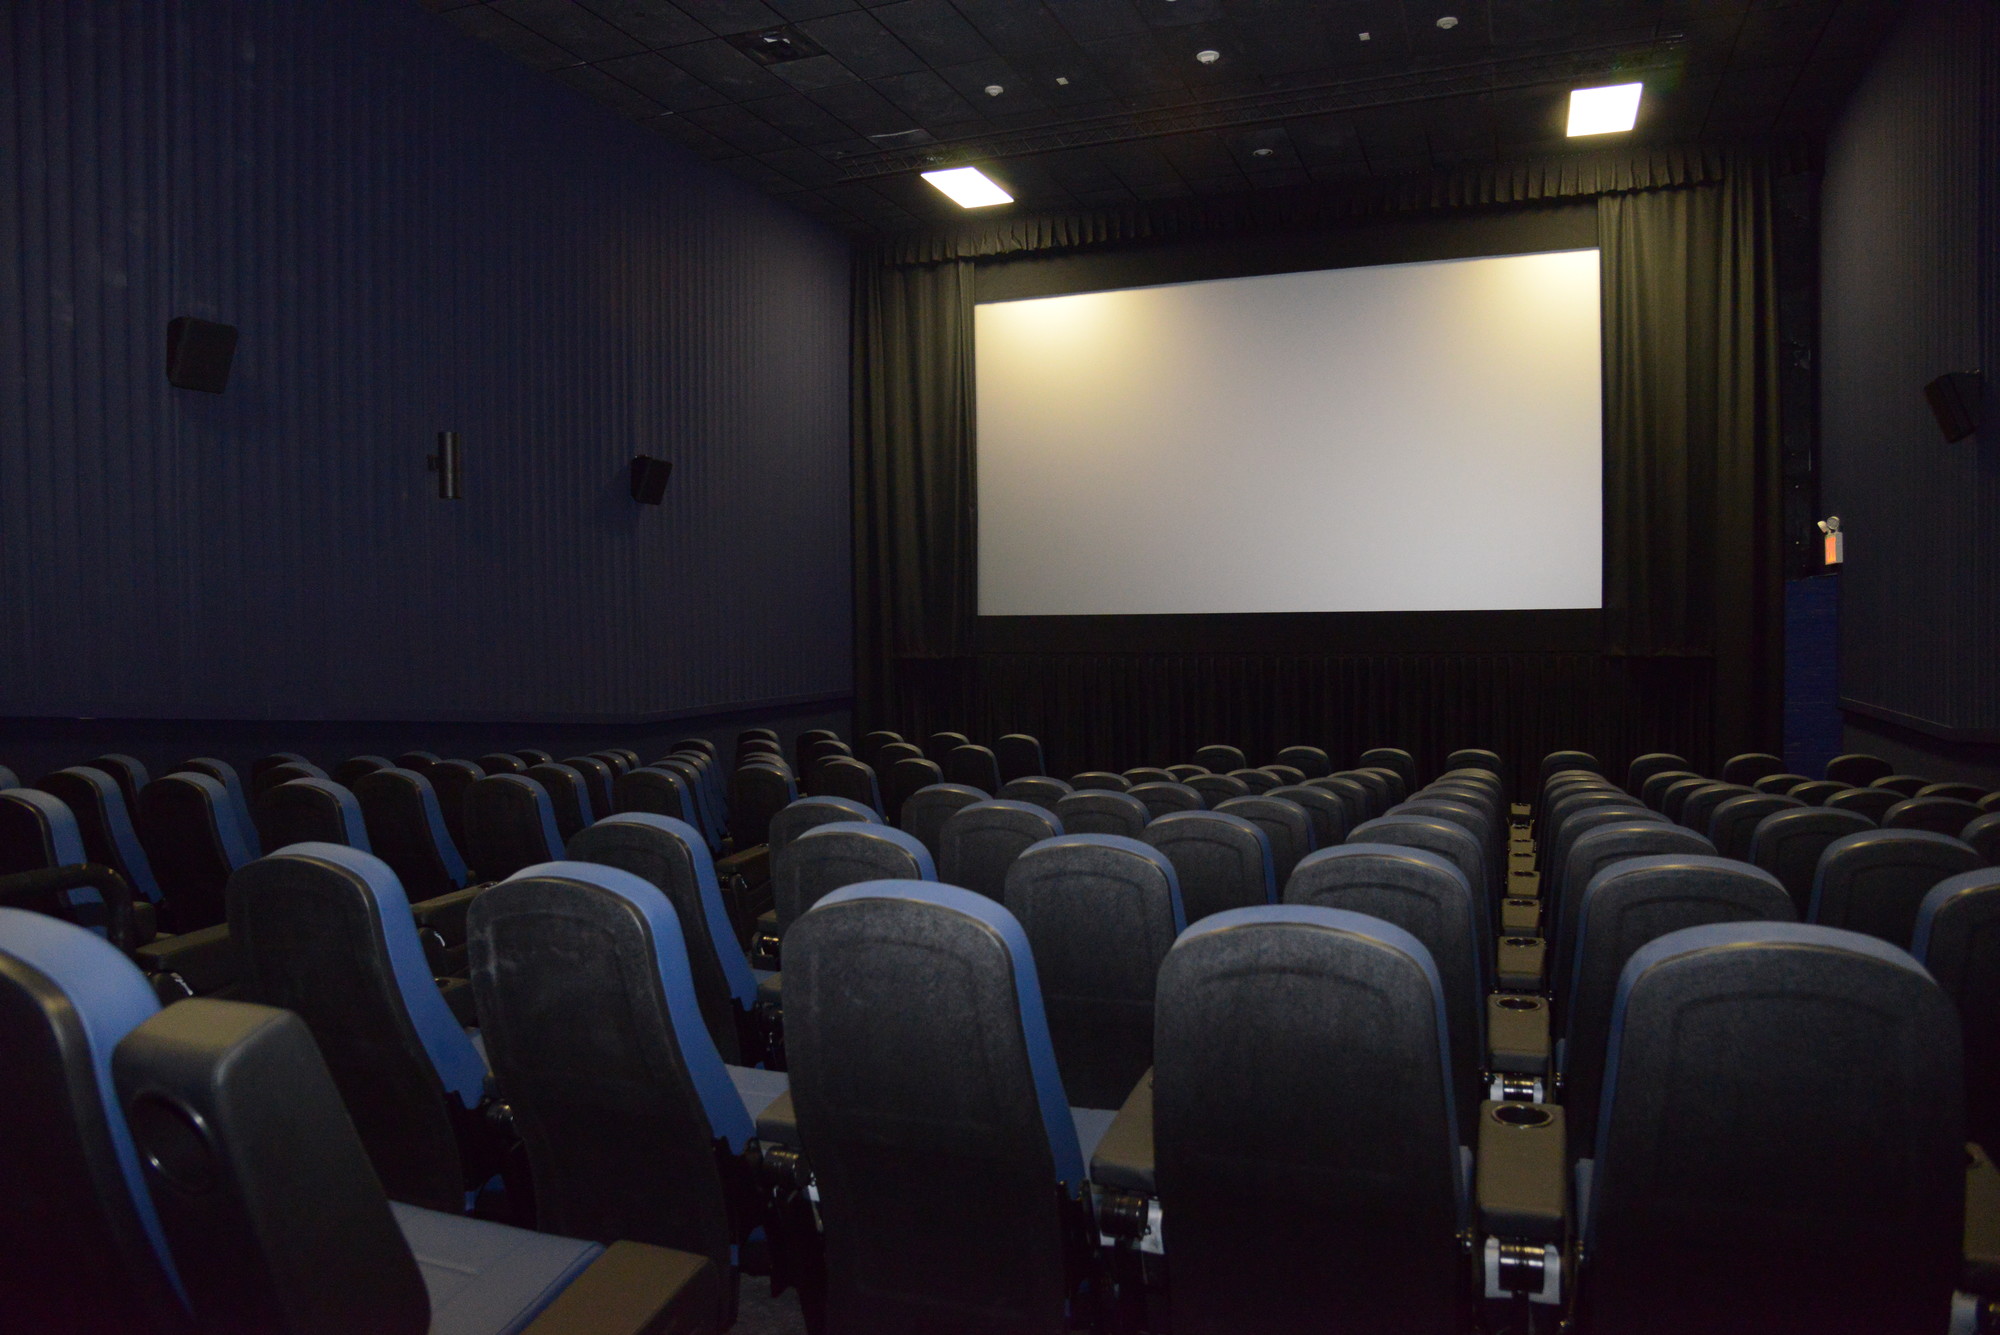 Long Beach Cinemas is expected to reopen on Friday, and the renovations include new movie screens and leather seats. The theater will also offer reserved seating and ticket kiosks.